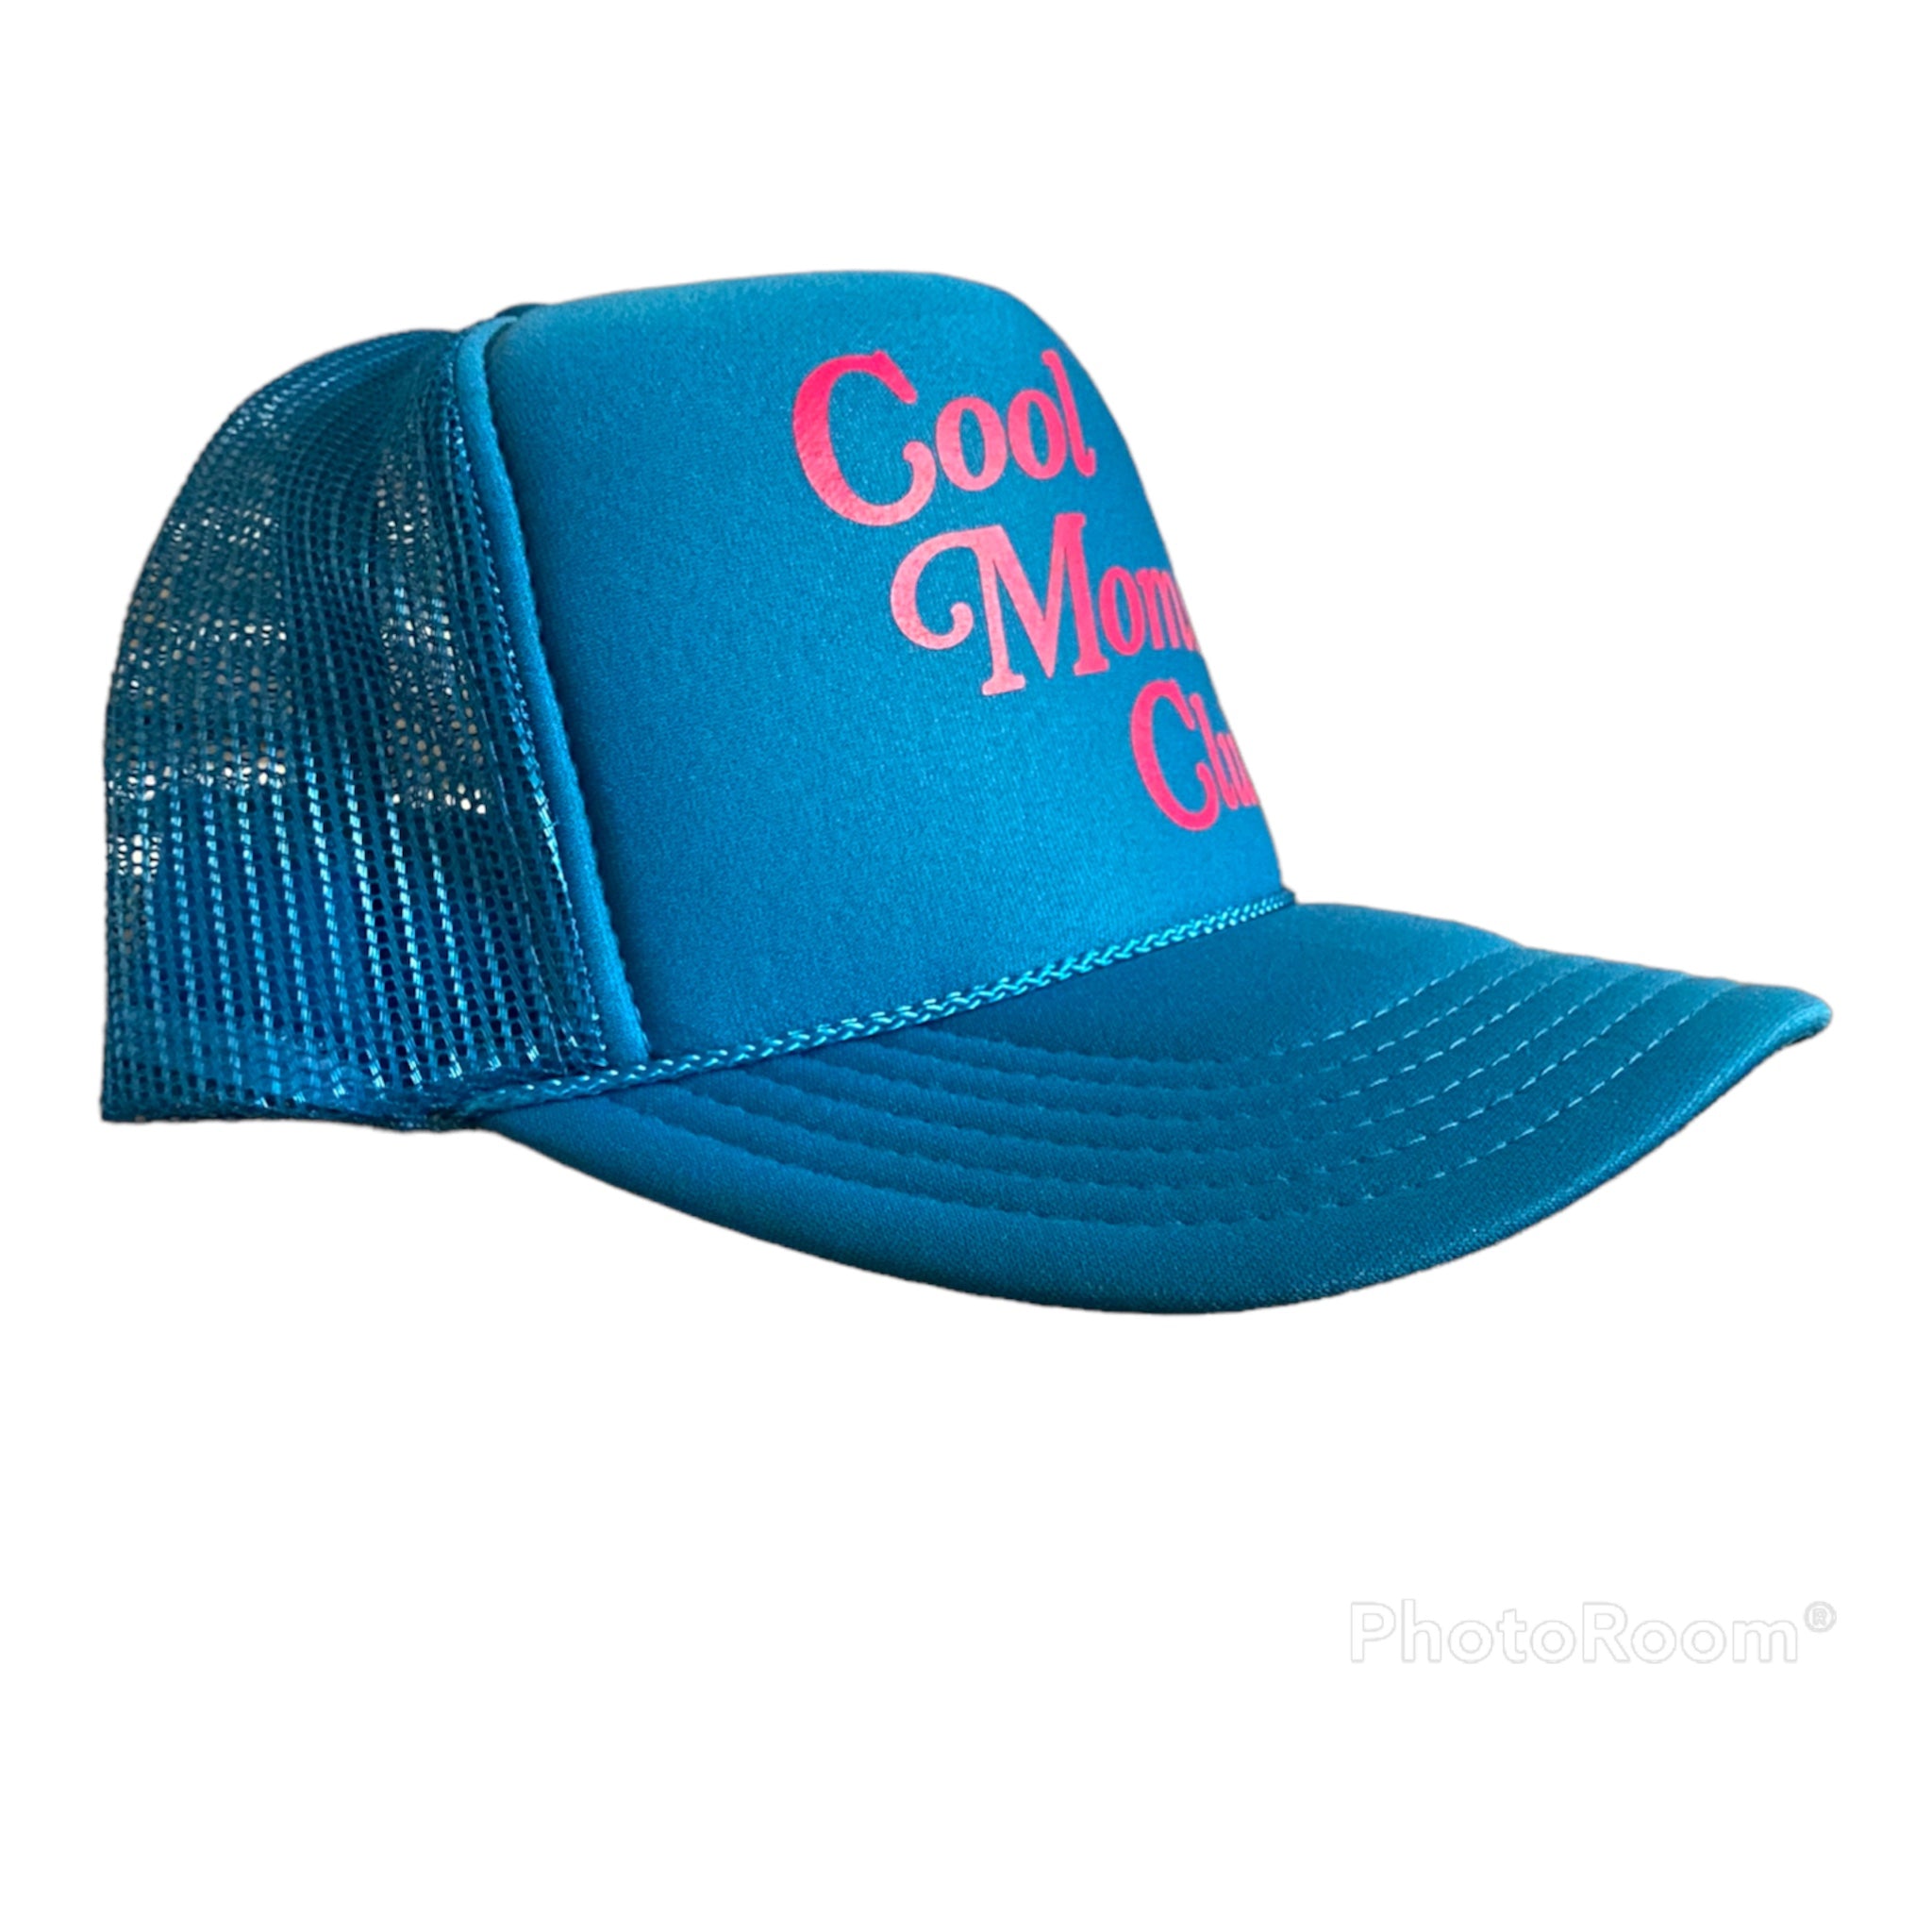 “Cool Moms Club” Trucker Hat - Turquoise